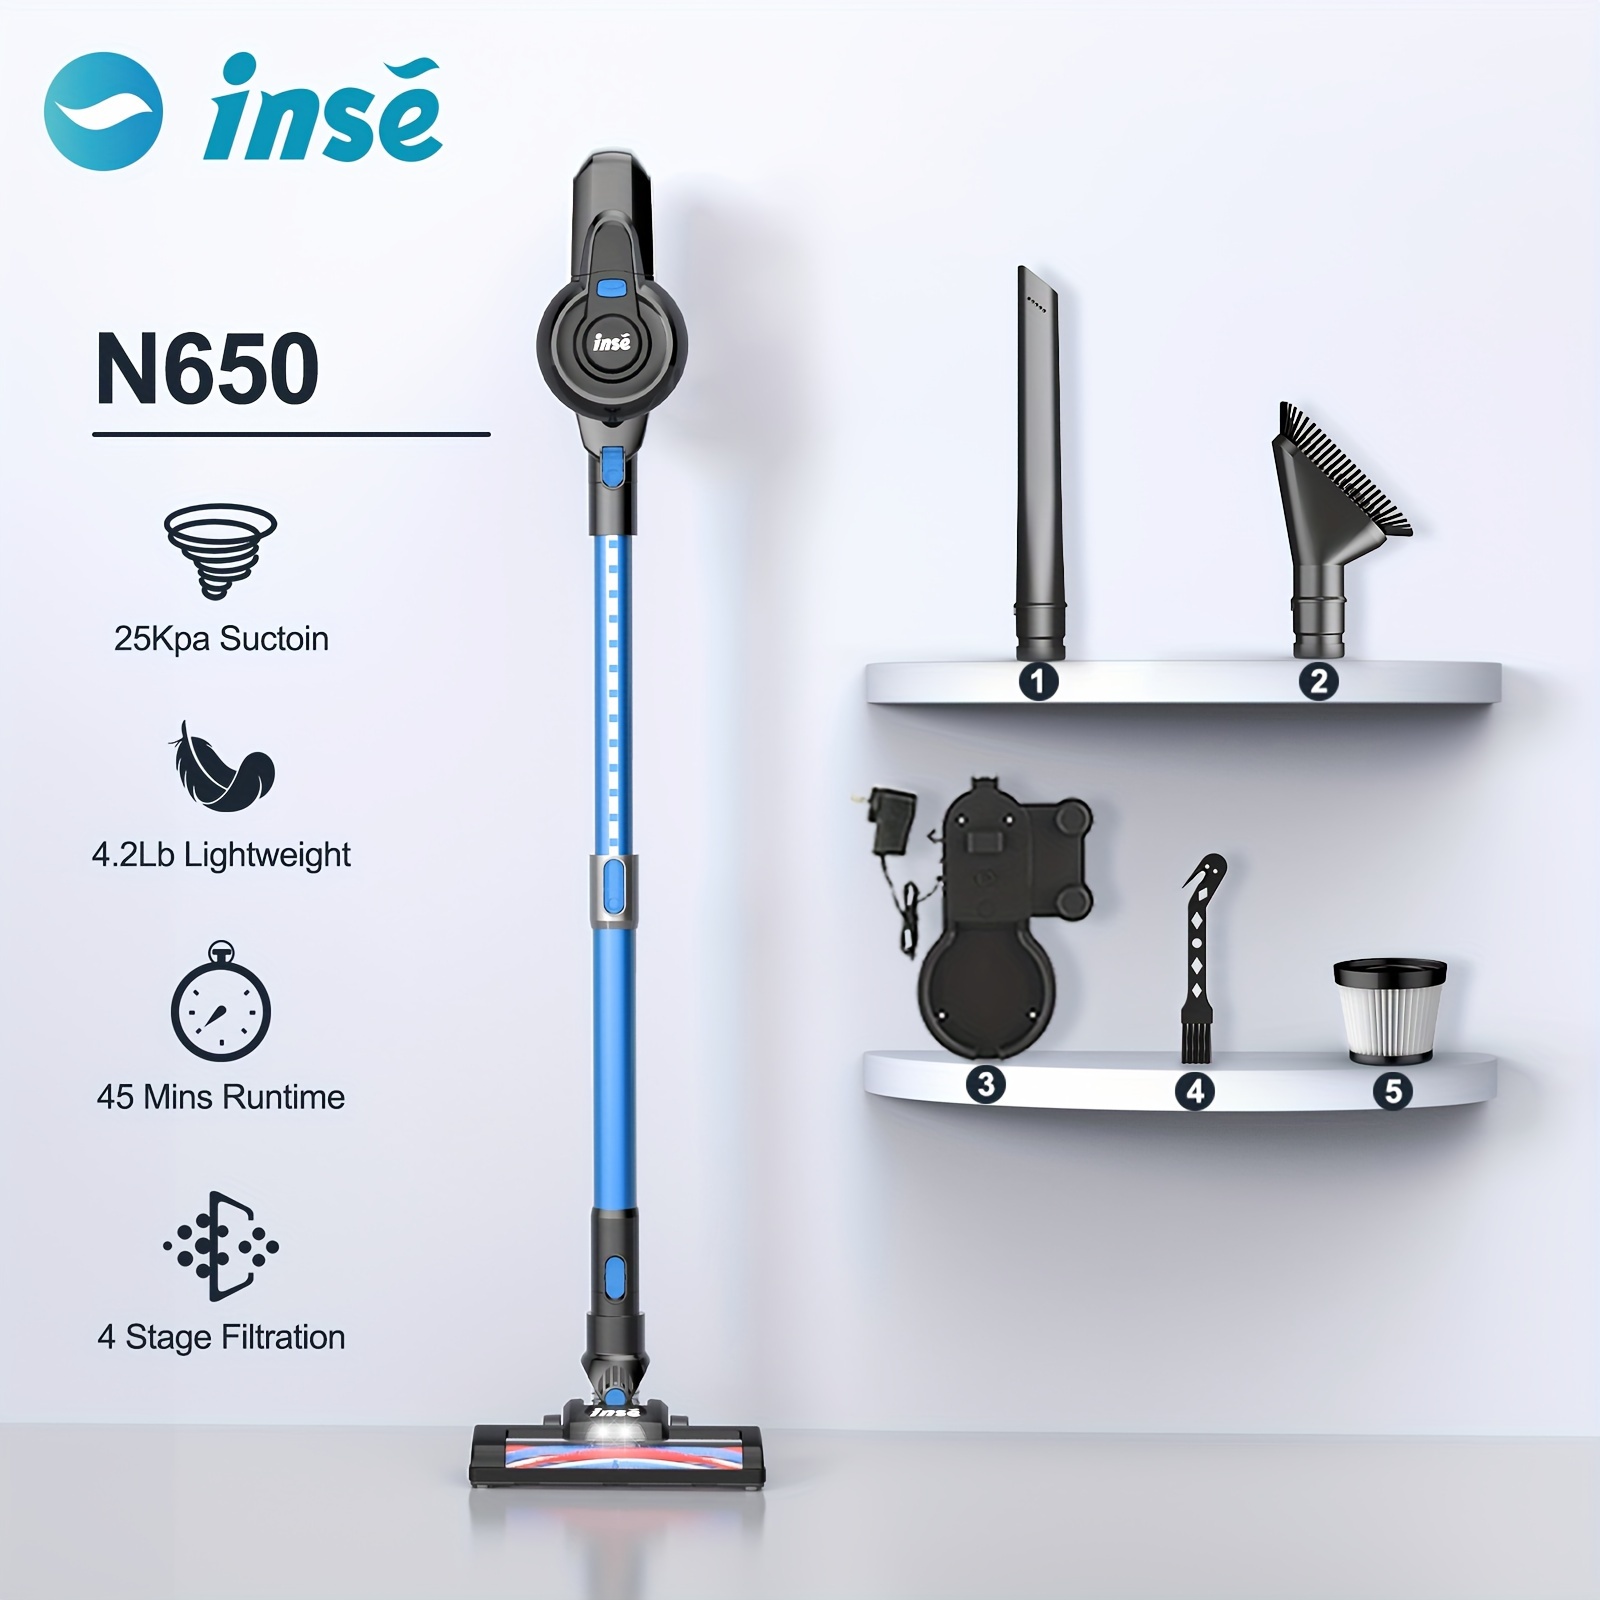 

Inse Cordless Vacuum Cleaner N650 For Home, 6-in-1 Powerful Stick Vacuum, Cleaner With 2200mah Battery Up To 45 Mins Runtime, Lightweight Handheld Vacuum For Home Hard Floor Carpet Pet Hair